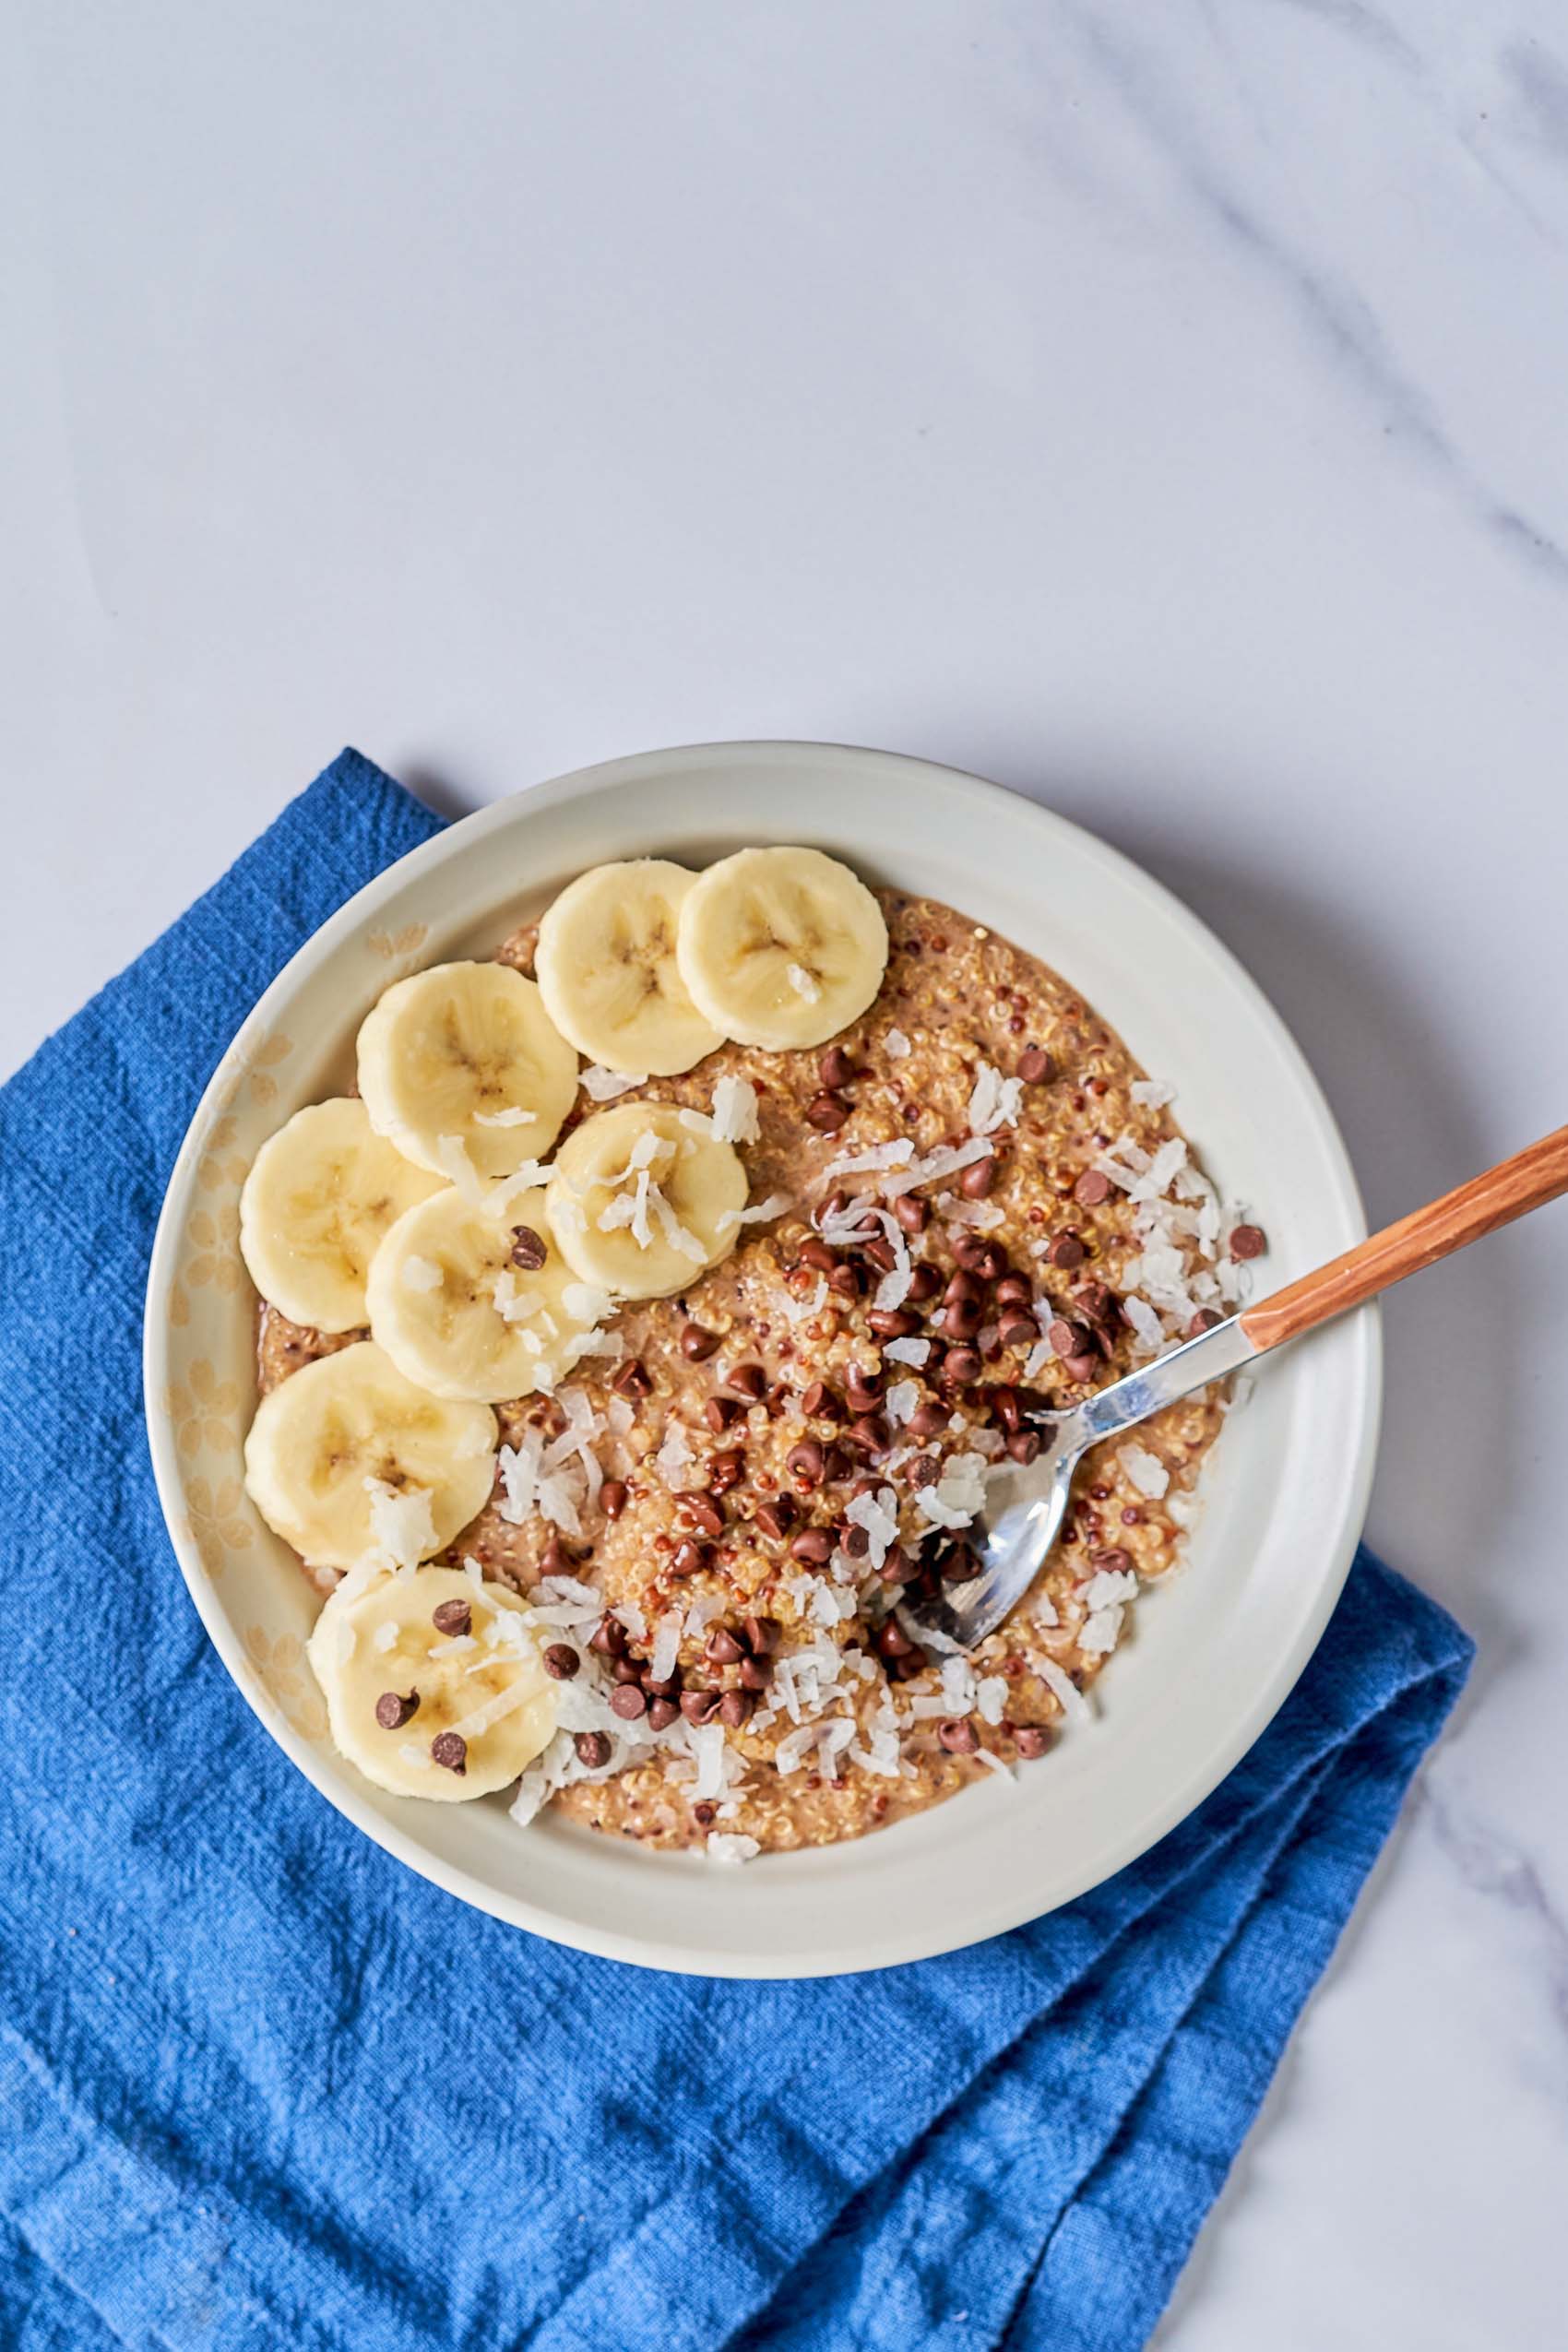 a spoon in a bowl of quinoa porridge topped with bananas, chocolate chips and coconut